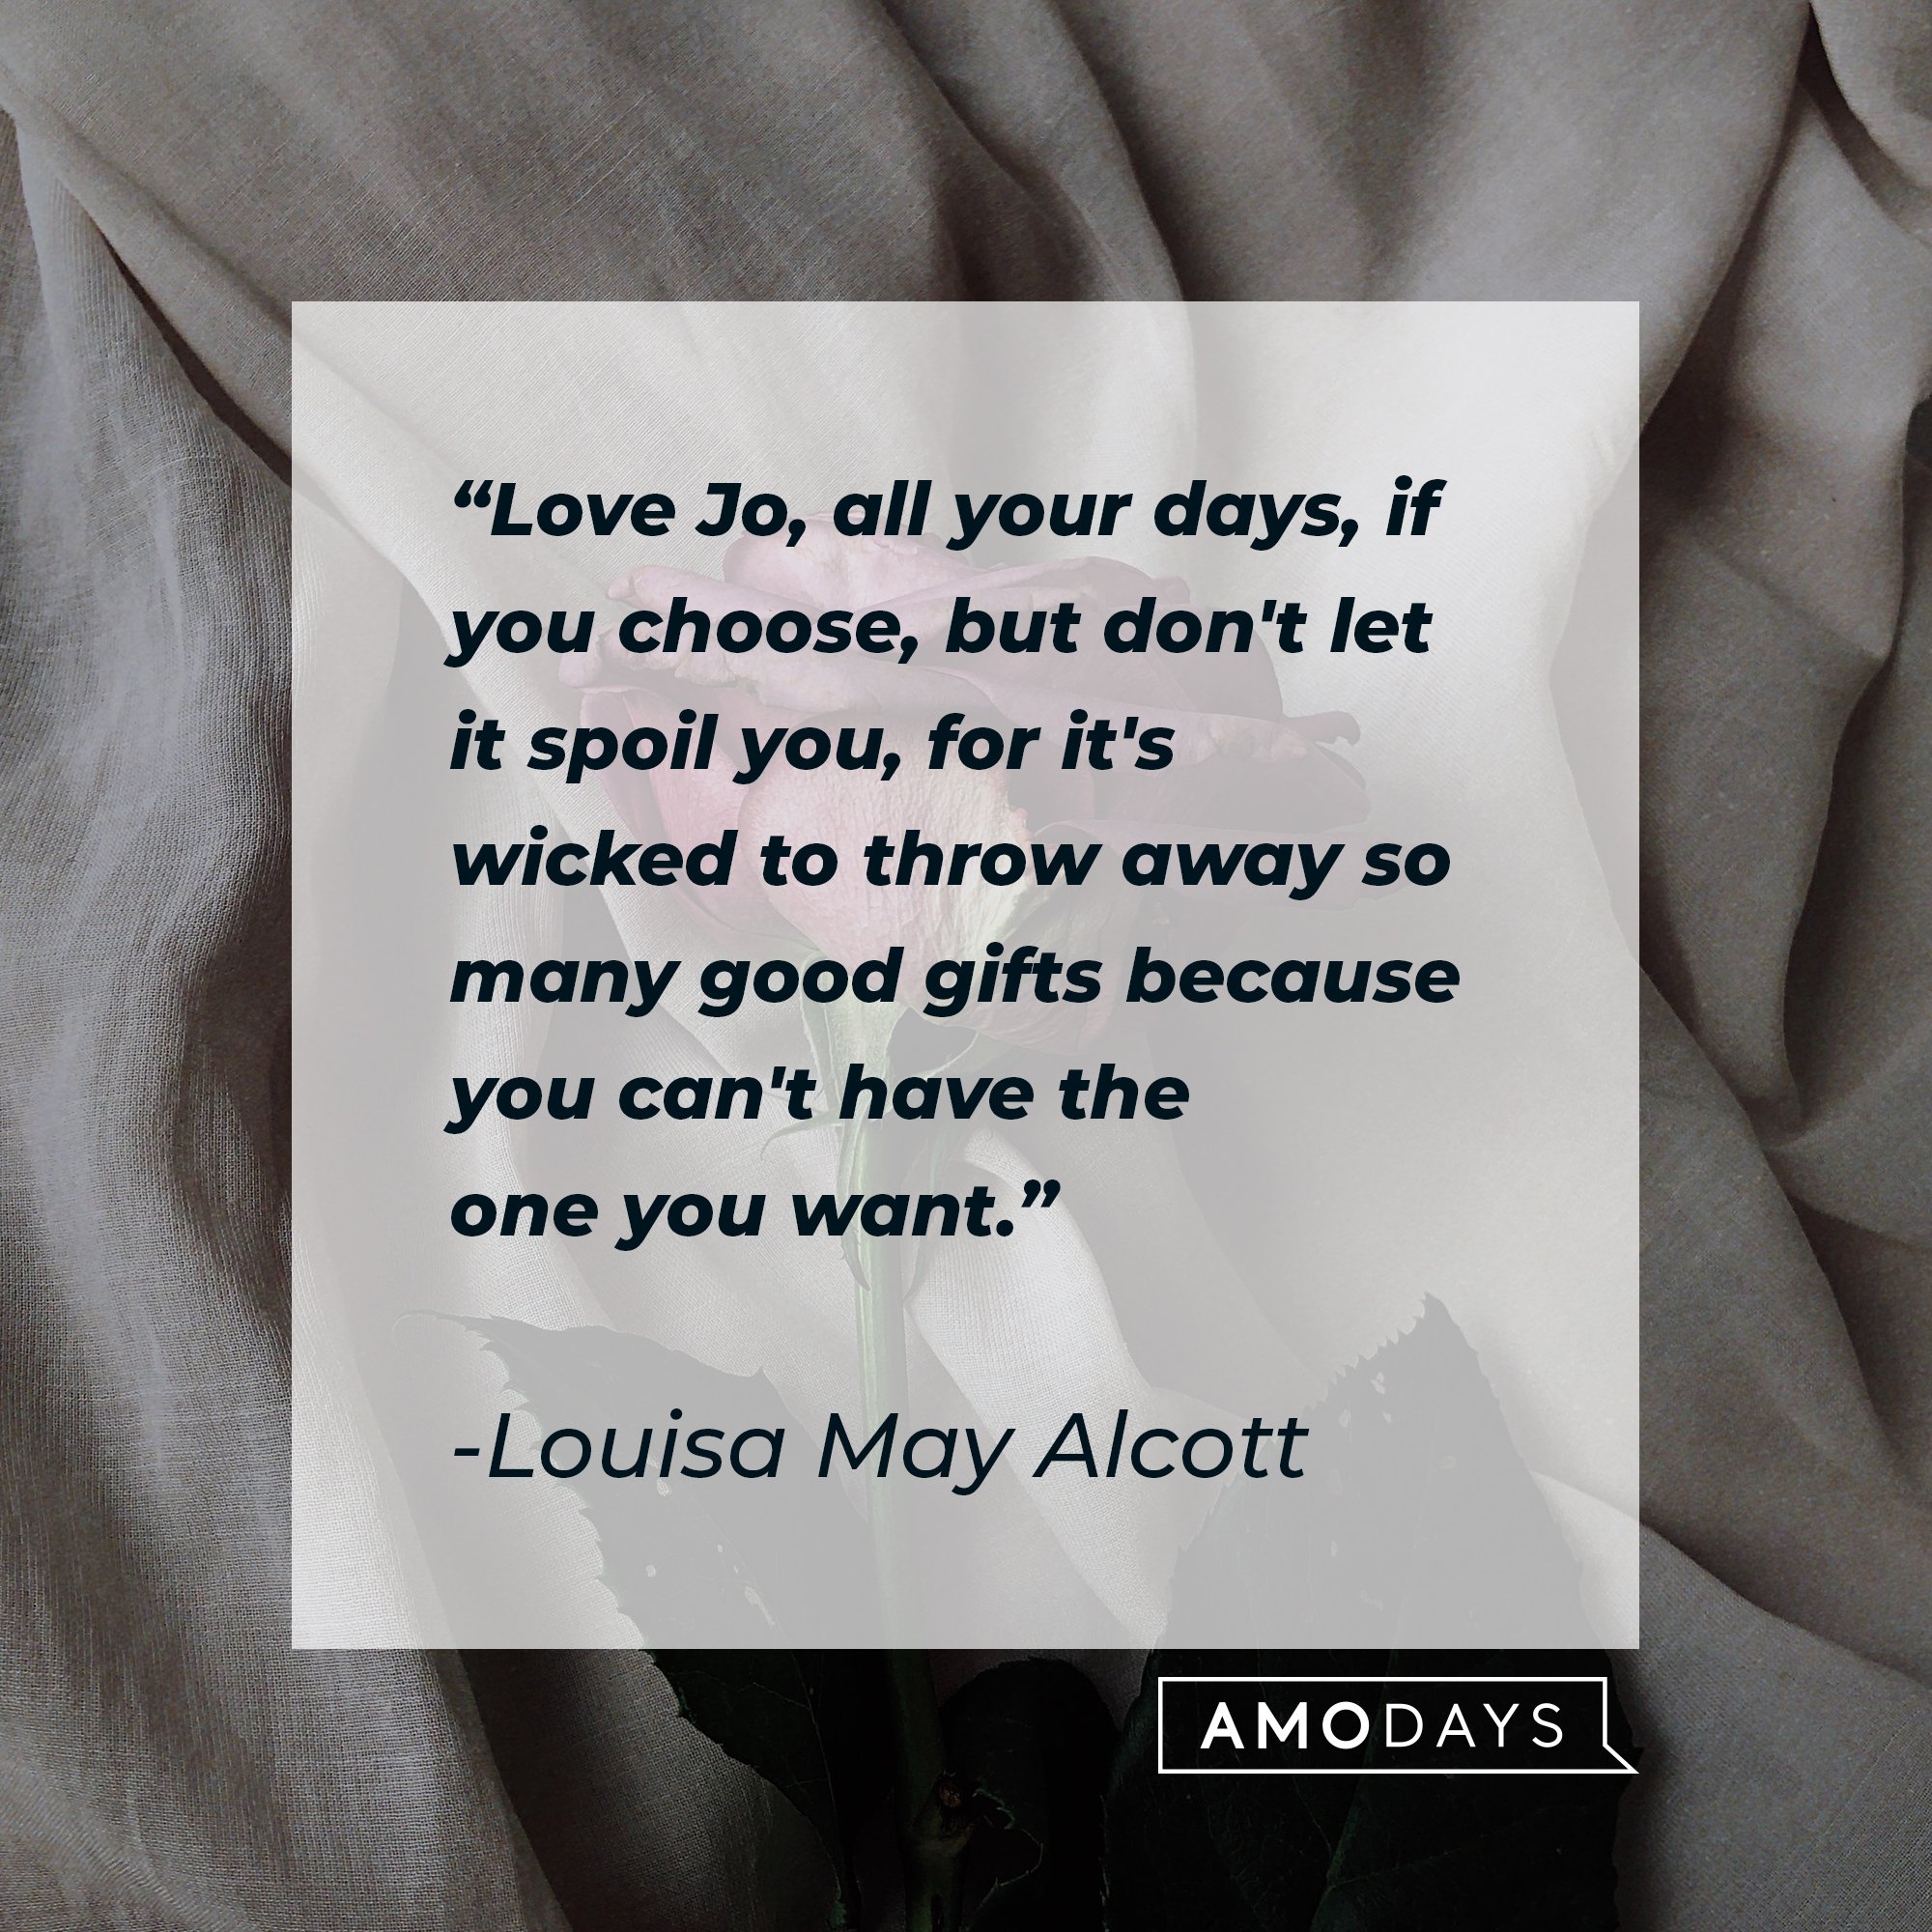  Louisa May Alcott’s quote: "Love Jo, all your days, if you choose, but don't let it spoil you, for it's wicked to throw away so many good gifts because you can't have the one you want."  | Image: AmoDays